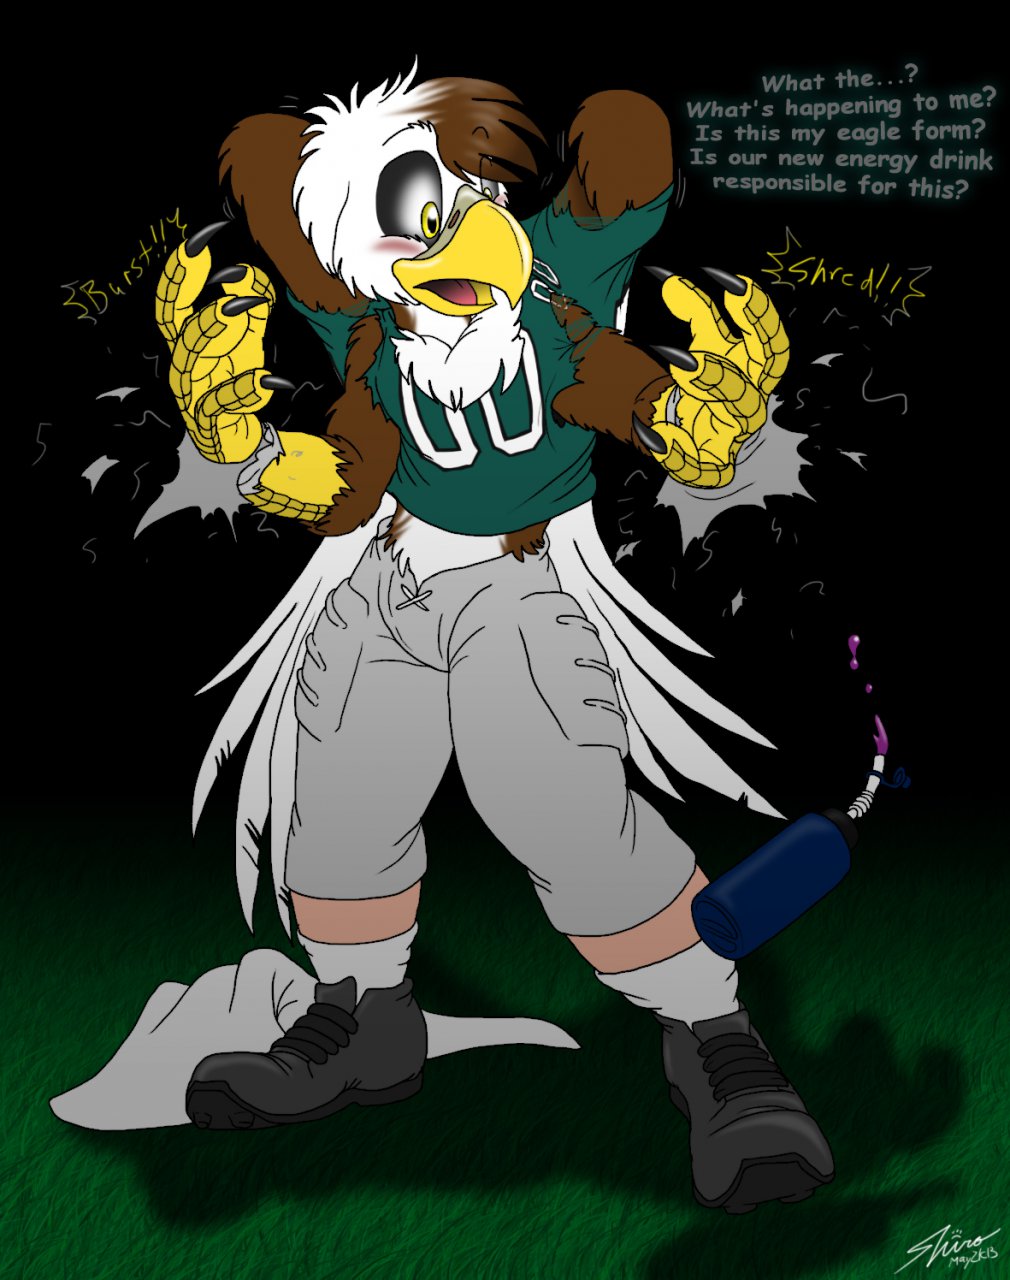 avian bald_eagle bird blush catmonkshiro cleats clothing drink eagle energy_drink feathers field football football_player gloves grass jersey male pheagle philadelphia_eagles scales shorts talons torn_clothing towel transformation uniform